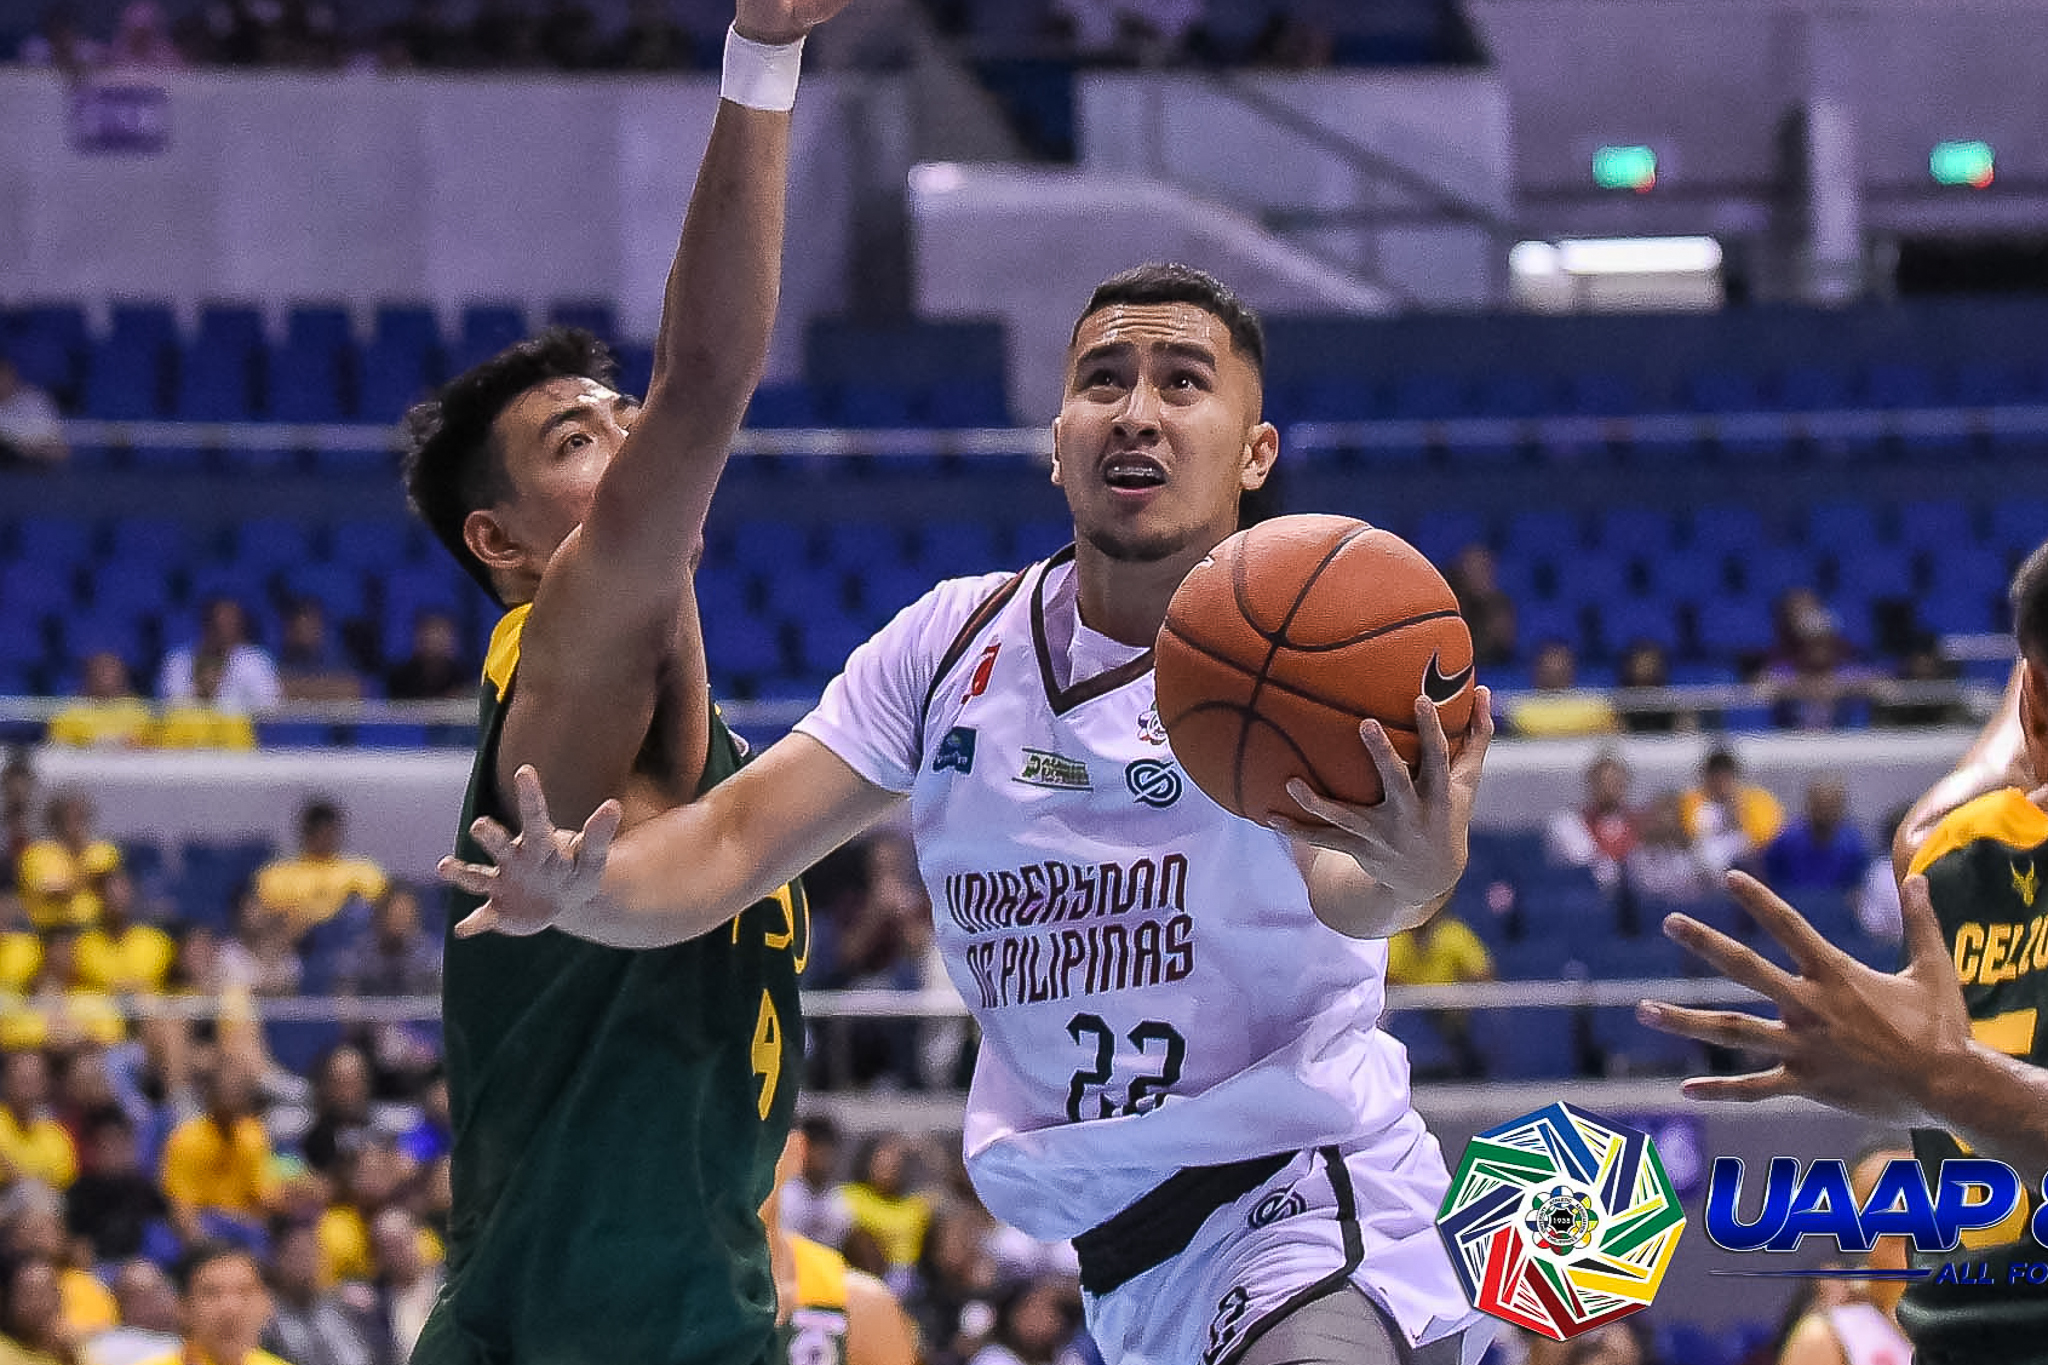 Javi GDL fires up as UP survives gritty FEU